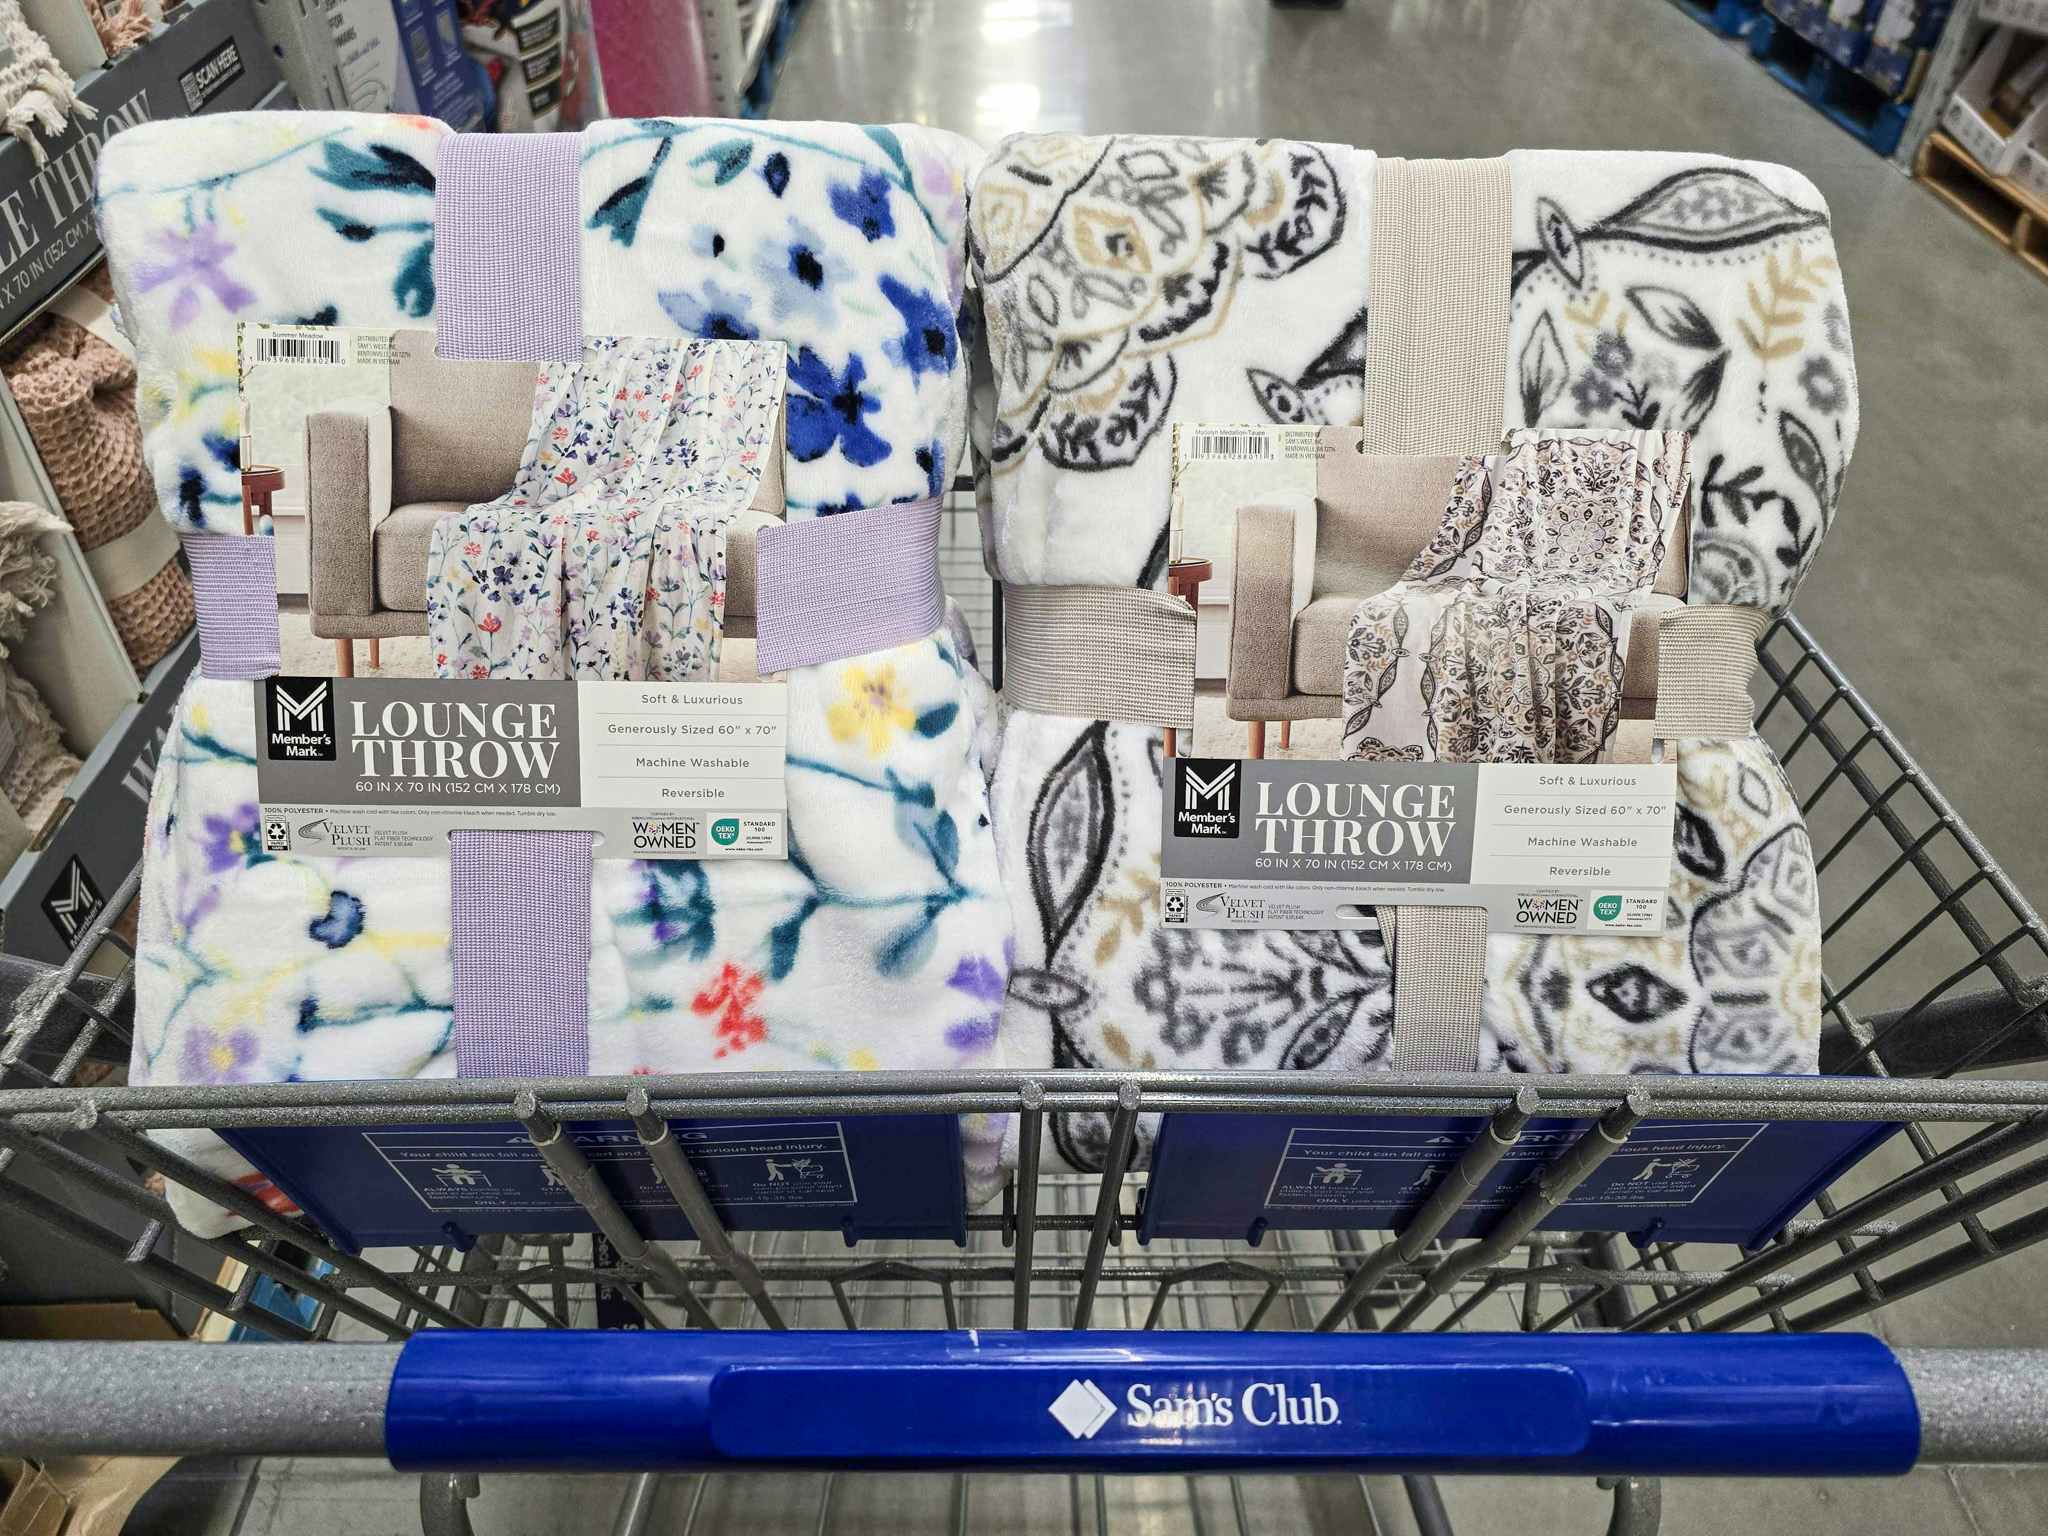 2 printed throw blankets in a cart